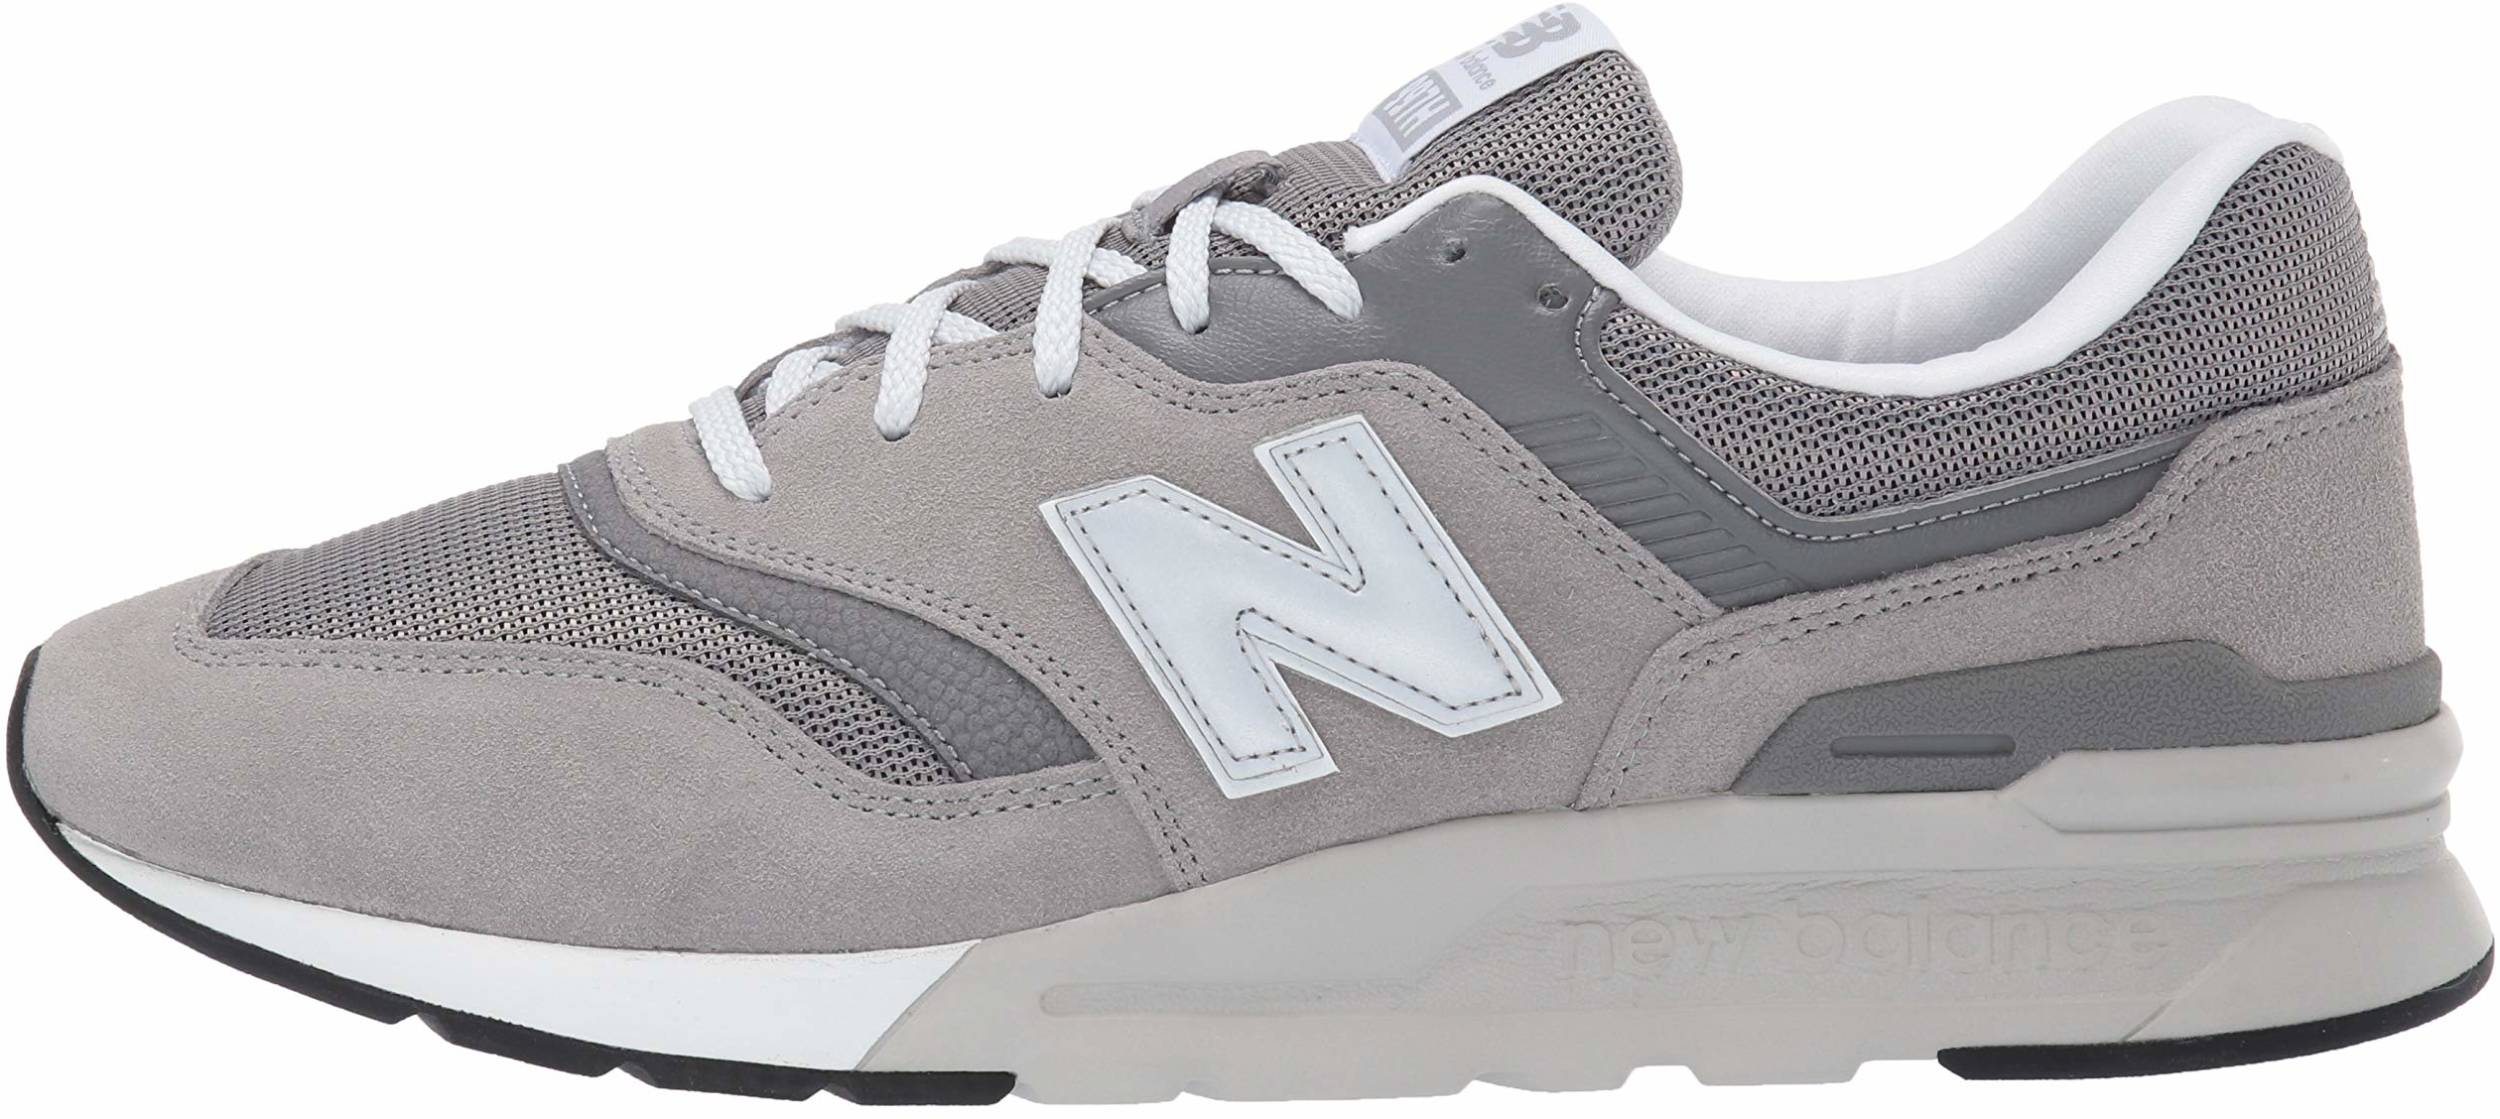 Only £32 + Review of New Balance 997H 